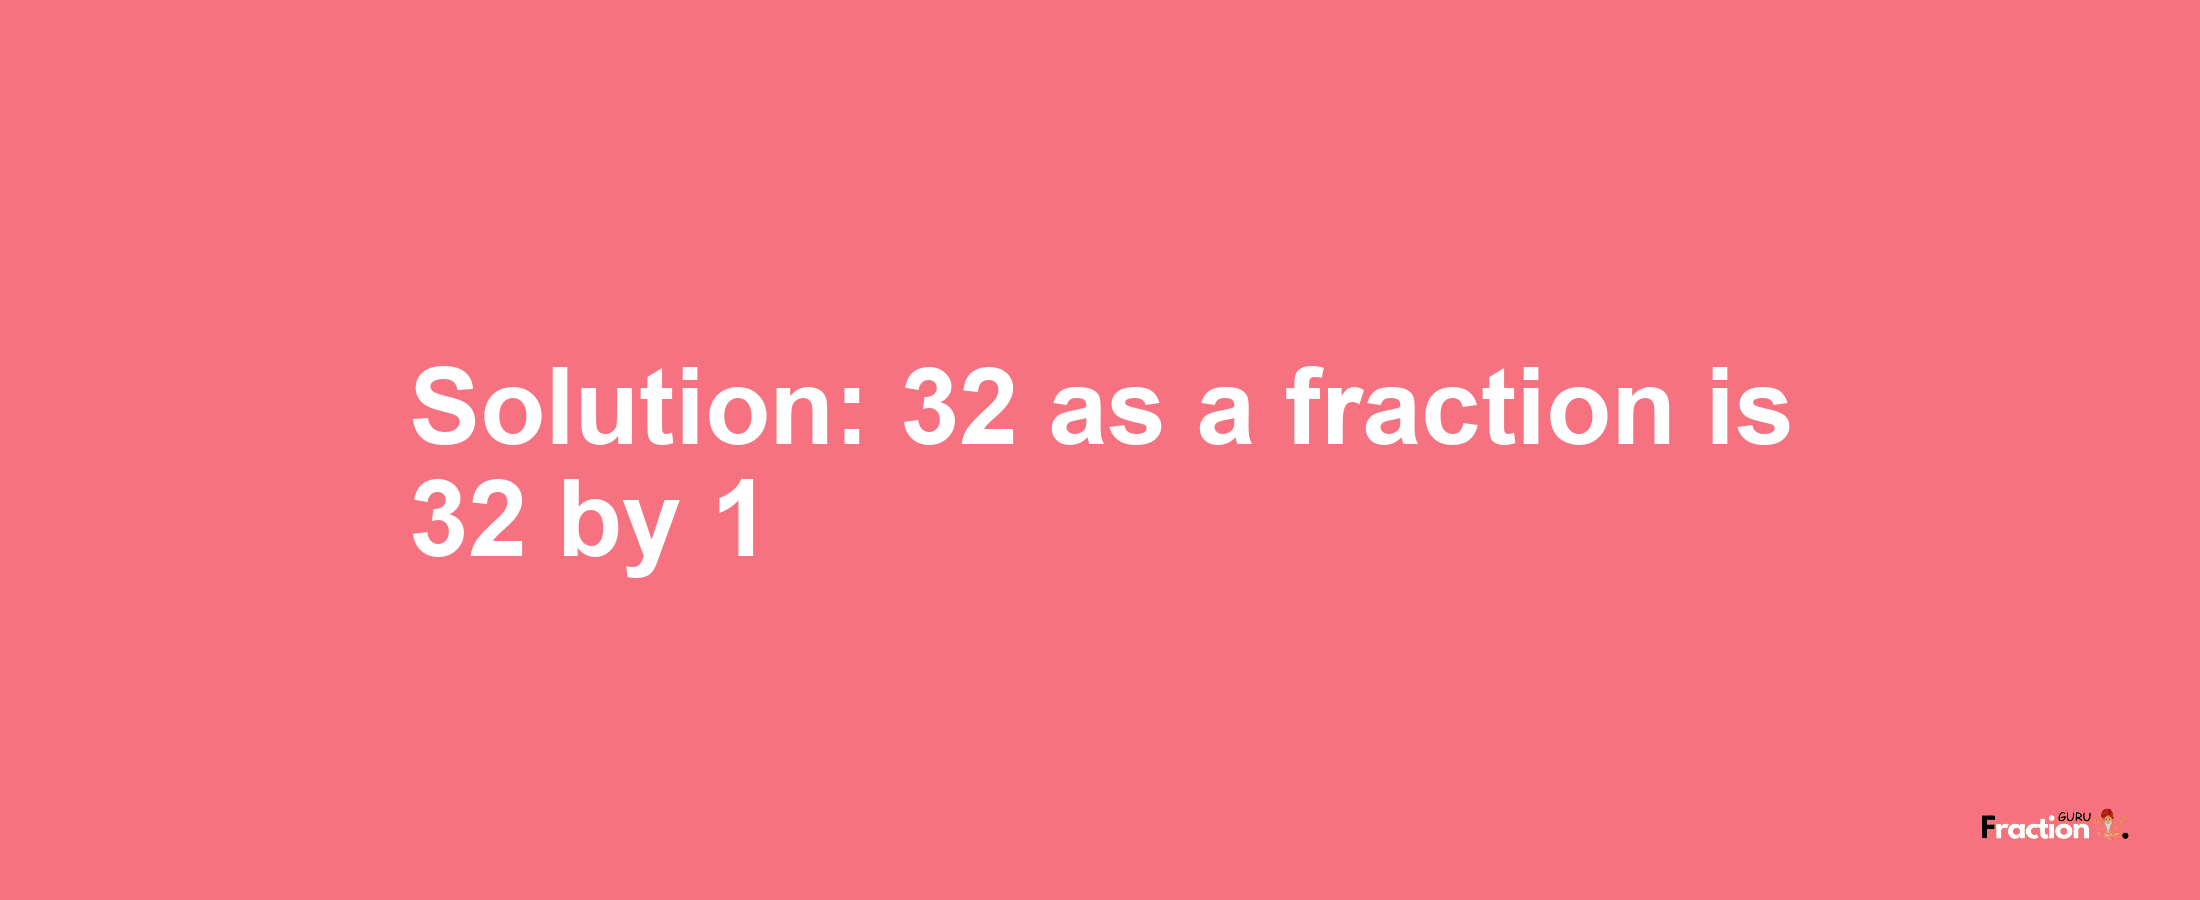 Solution:32 as a fraction is 32/1